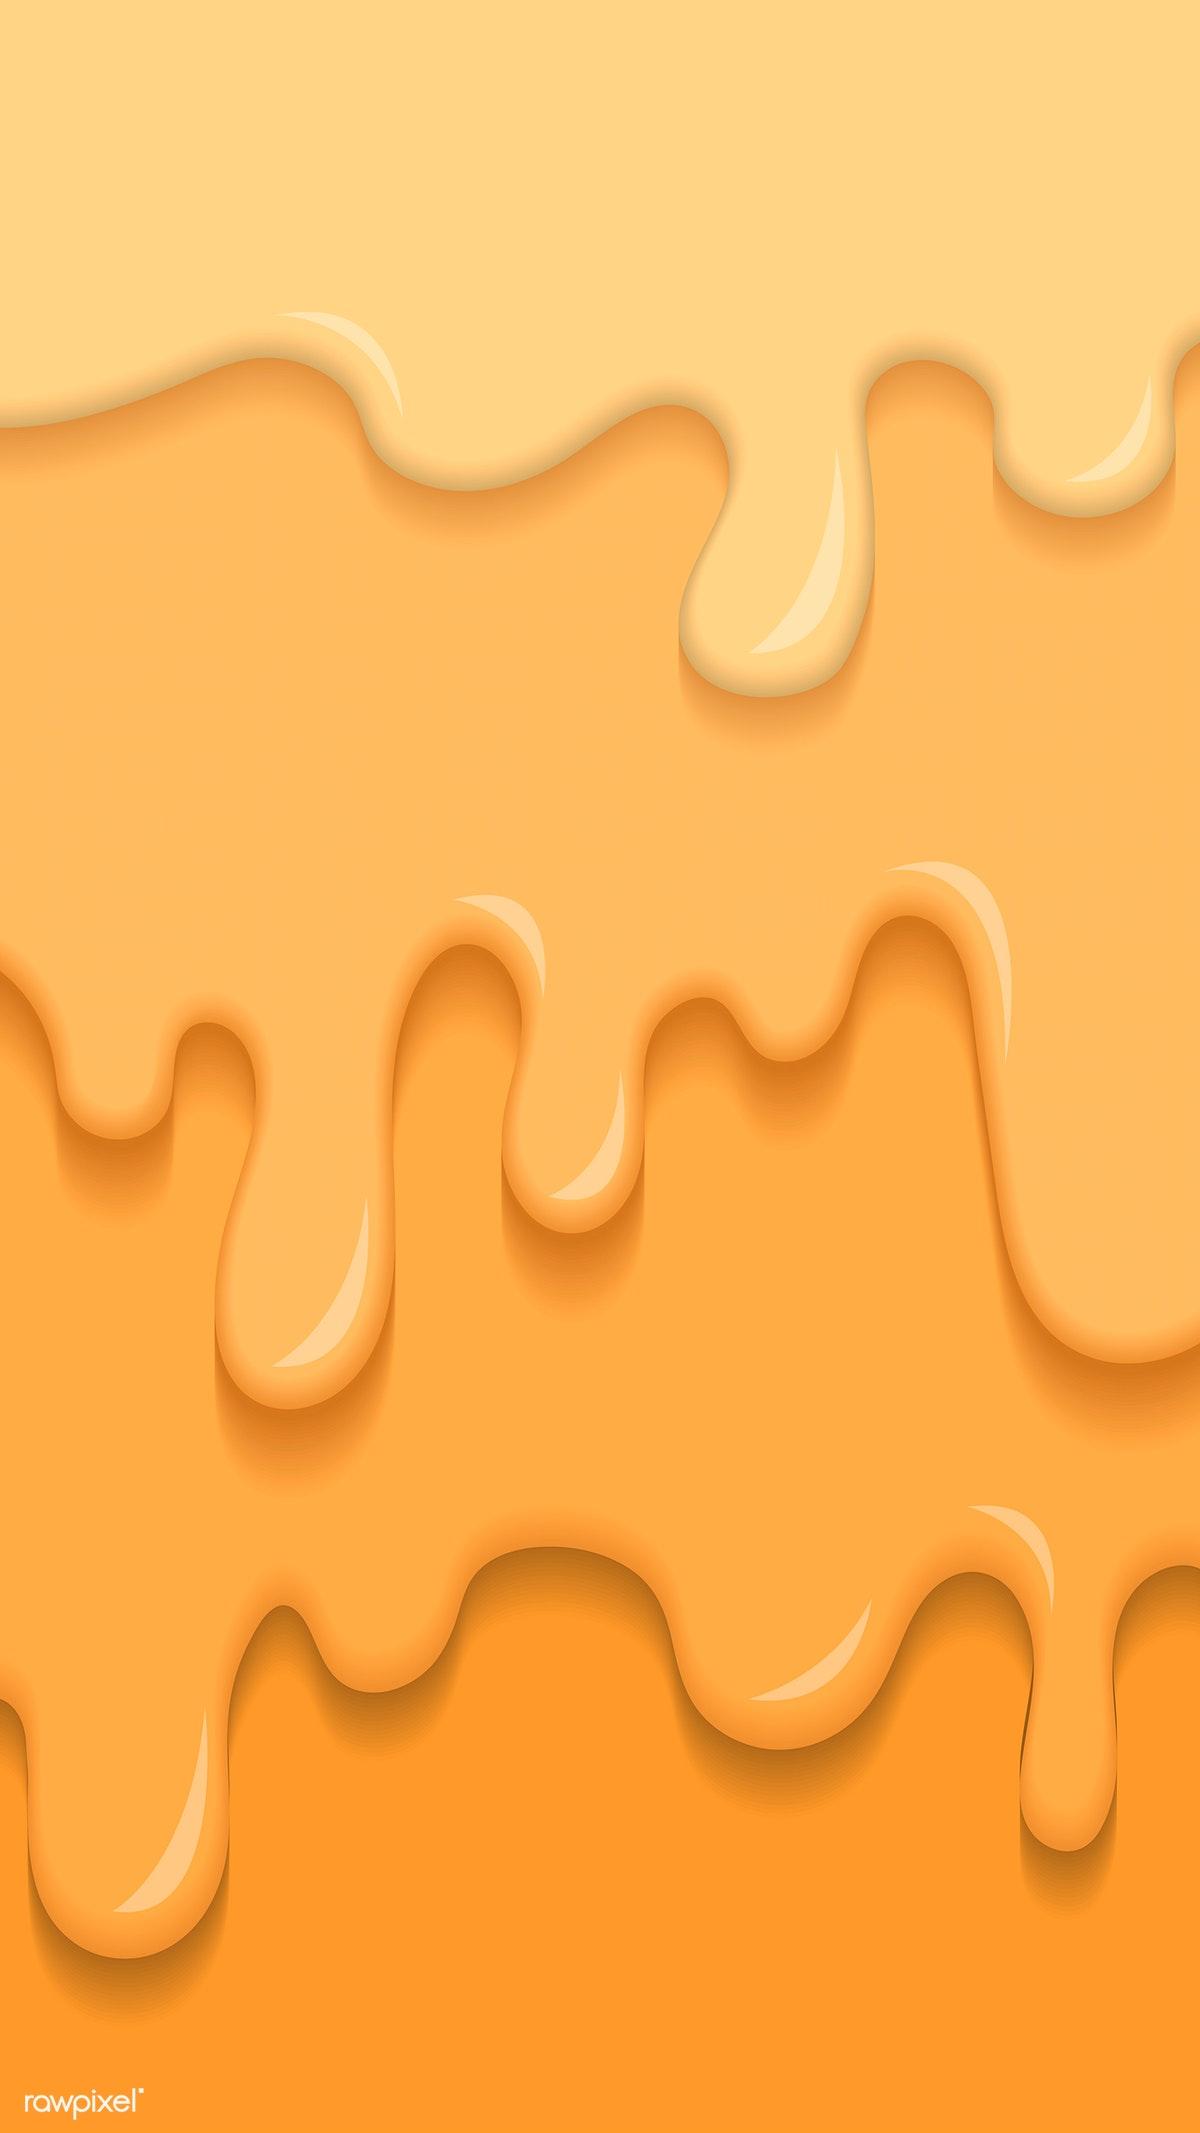 Download premium vector of Creamy dripping shades of yellow mobile phone